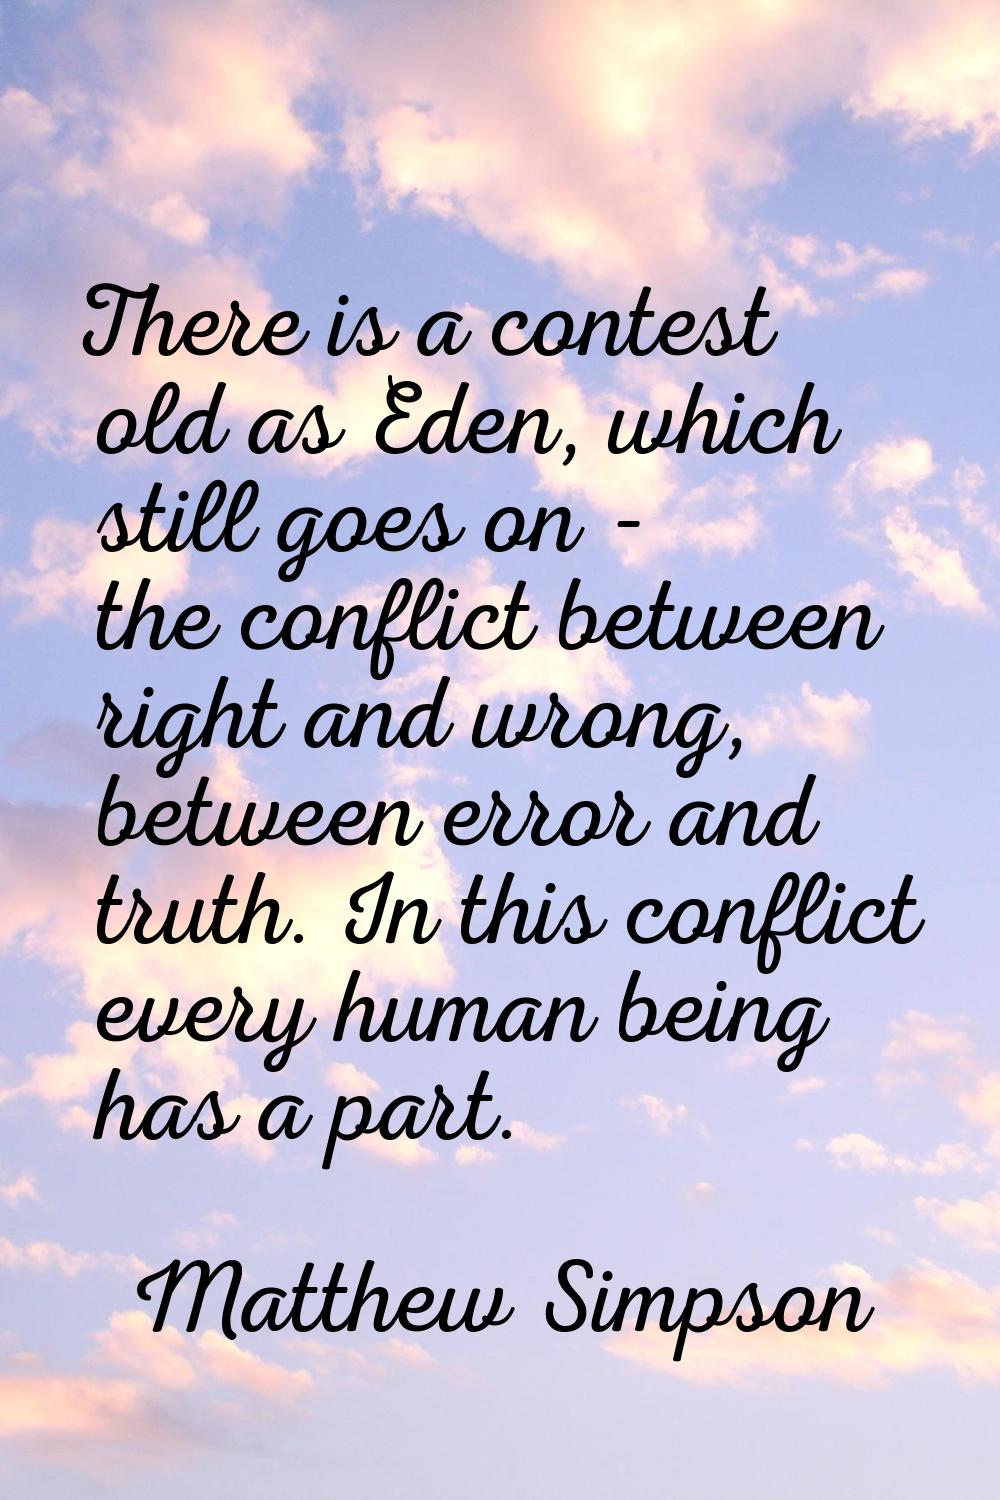 There is a contest old as Eden, which still goes on - the conflict between right and wrong, between